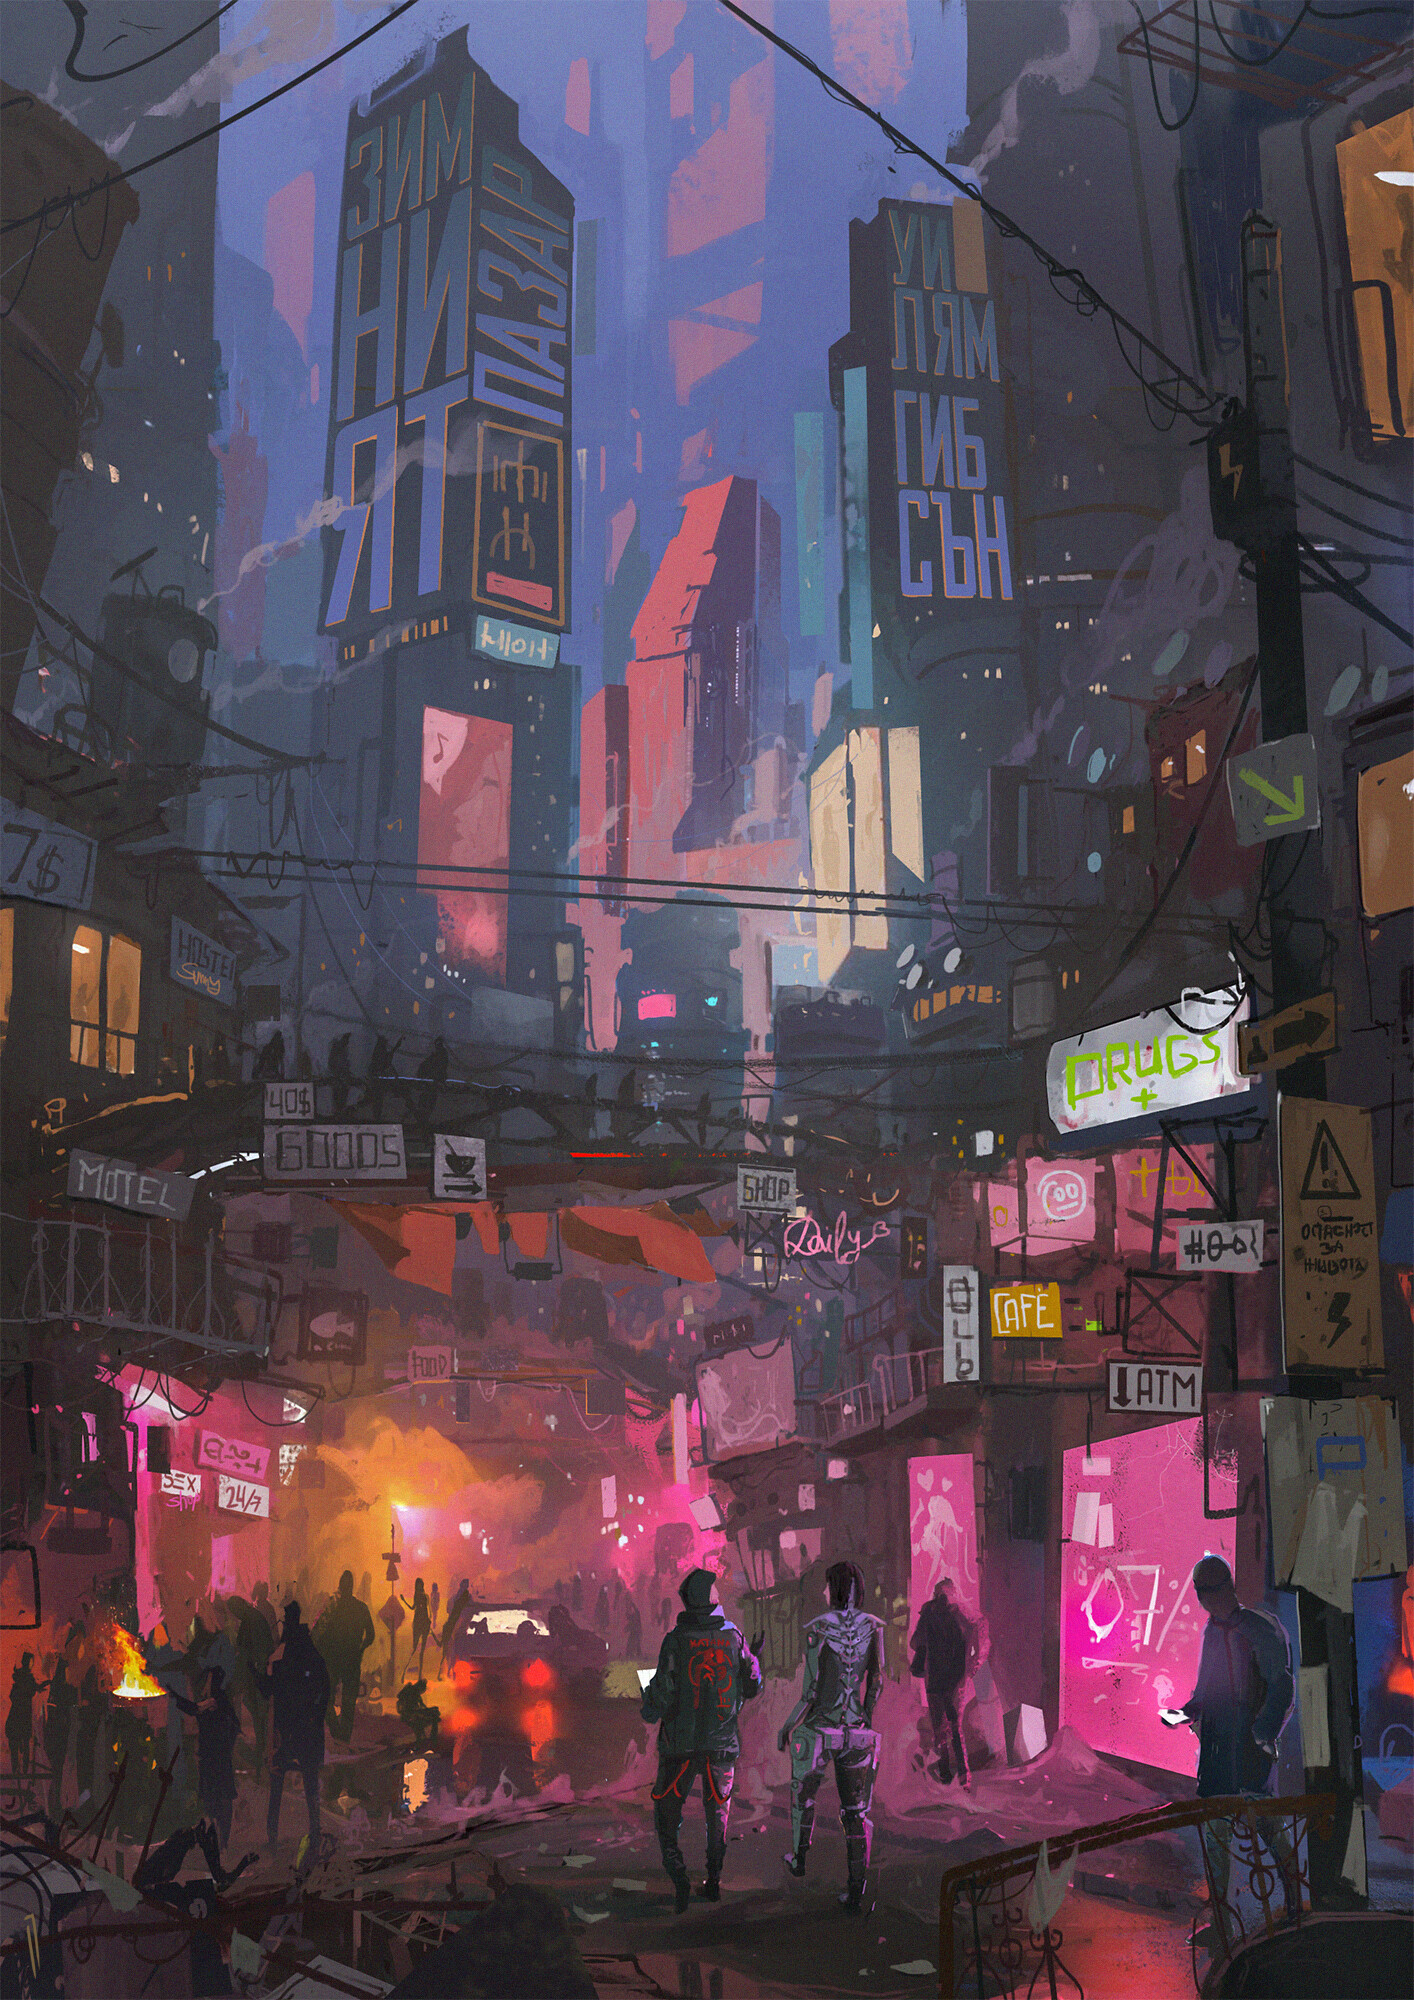 The Winter Market by Ismail Inceoglu